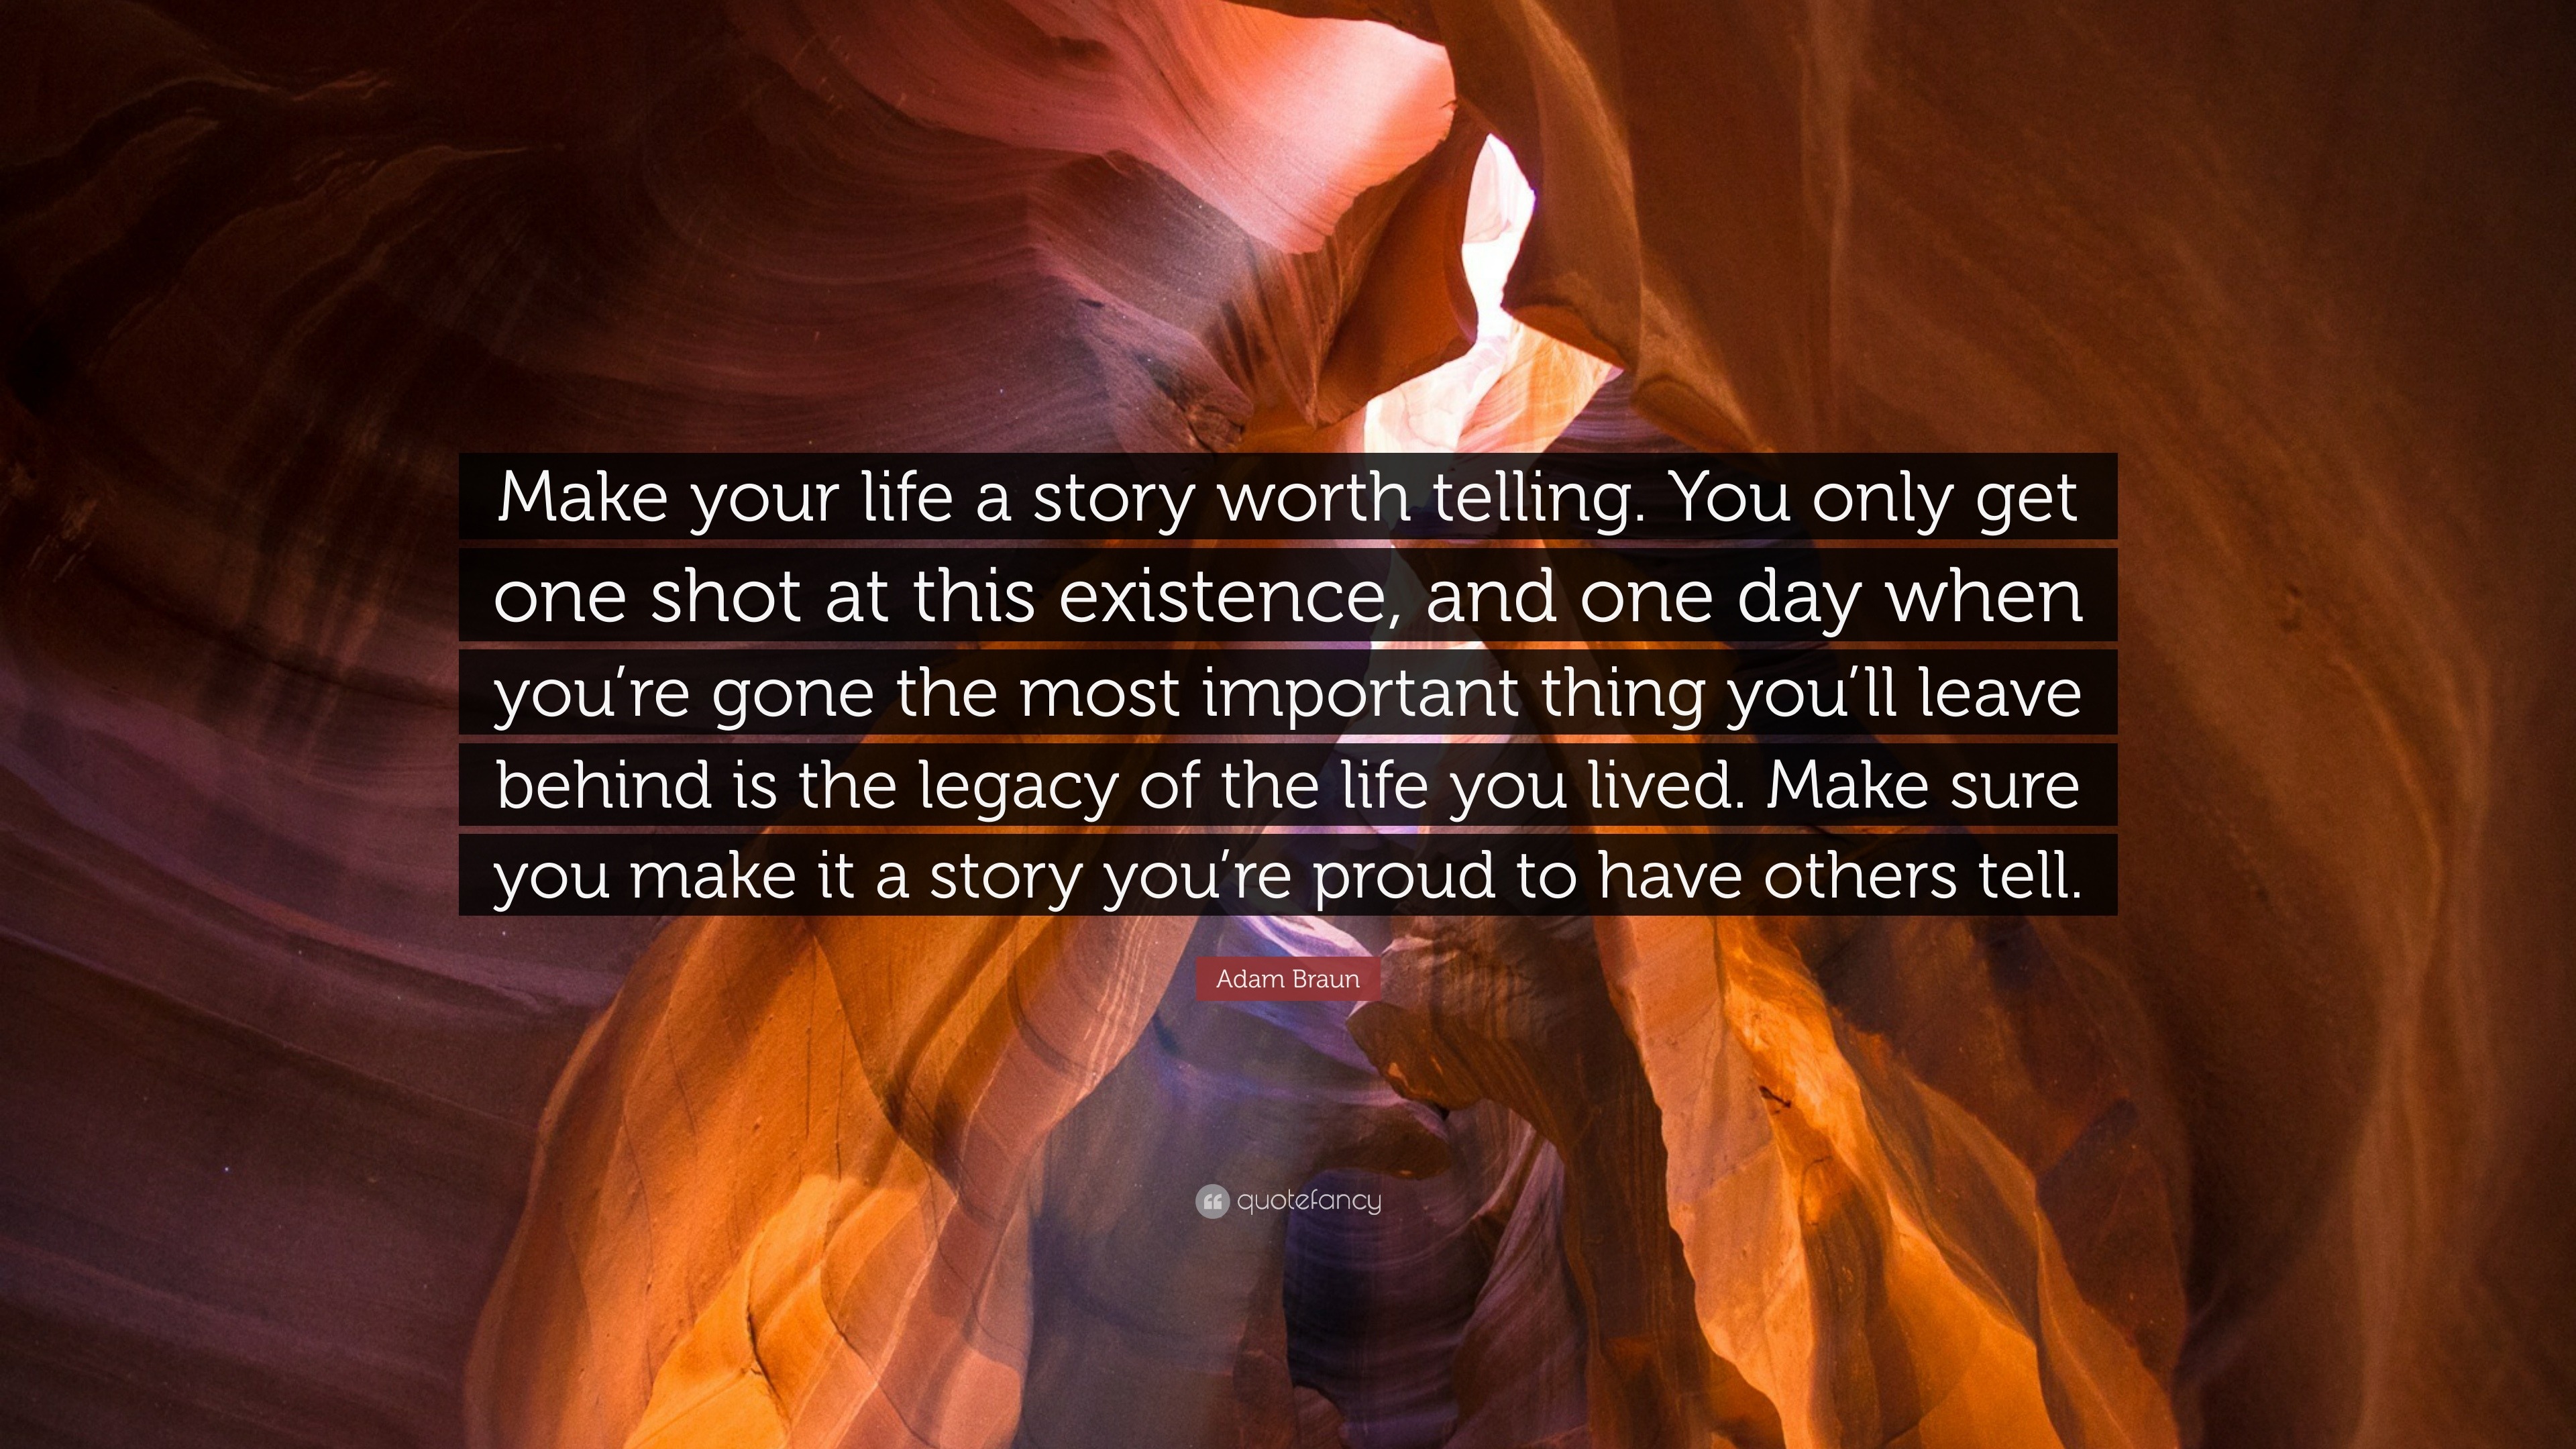 Adam Braun Quote “Make your life a story worth telling You only